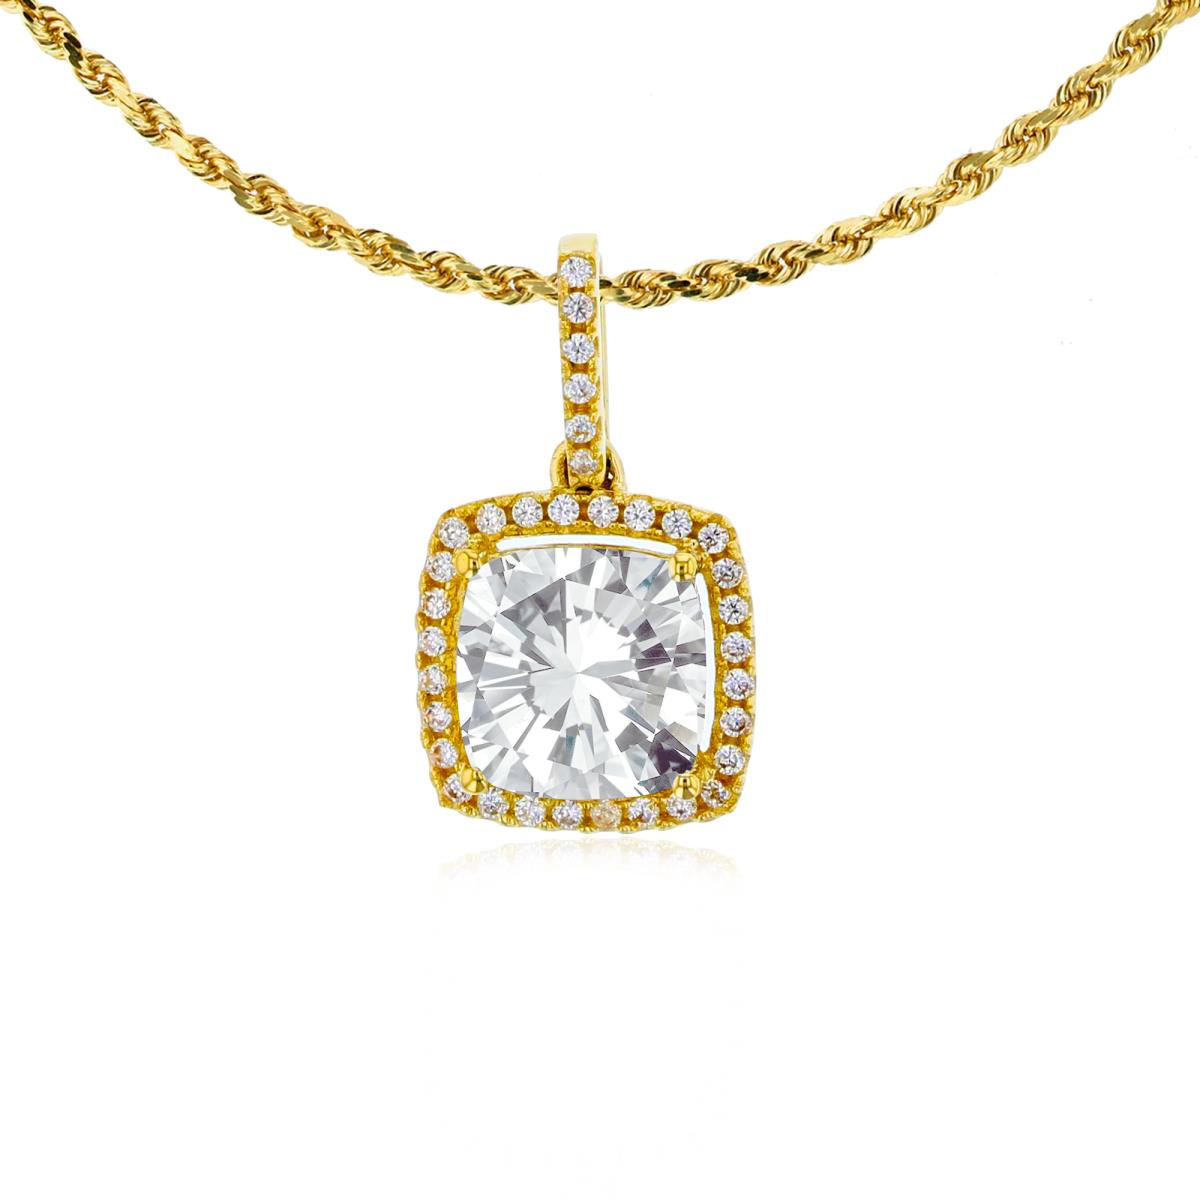 10K Yellow Gold 7mm Cushion White Topaz & 0.14 CTTW Rnd Diamond Halo 18" Rope Chain Necklace